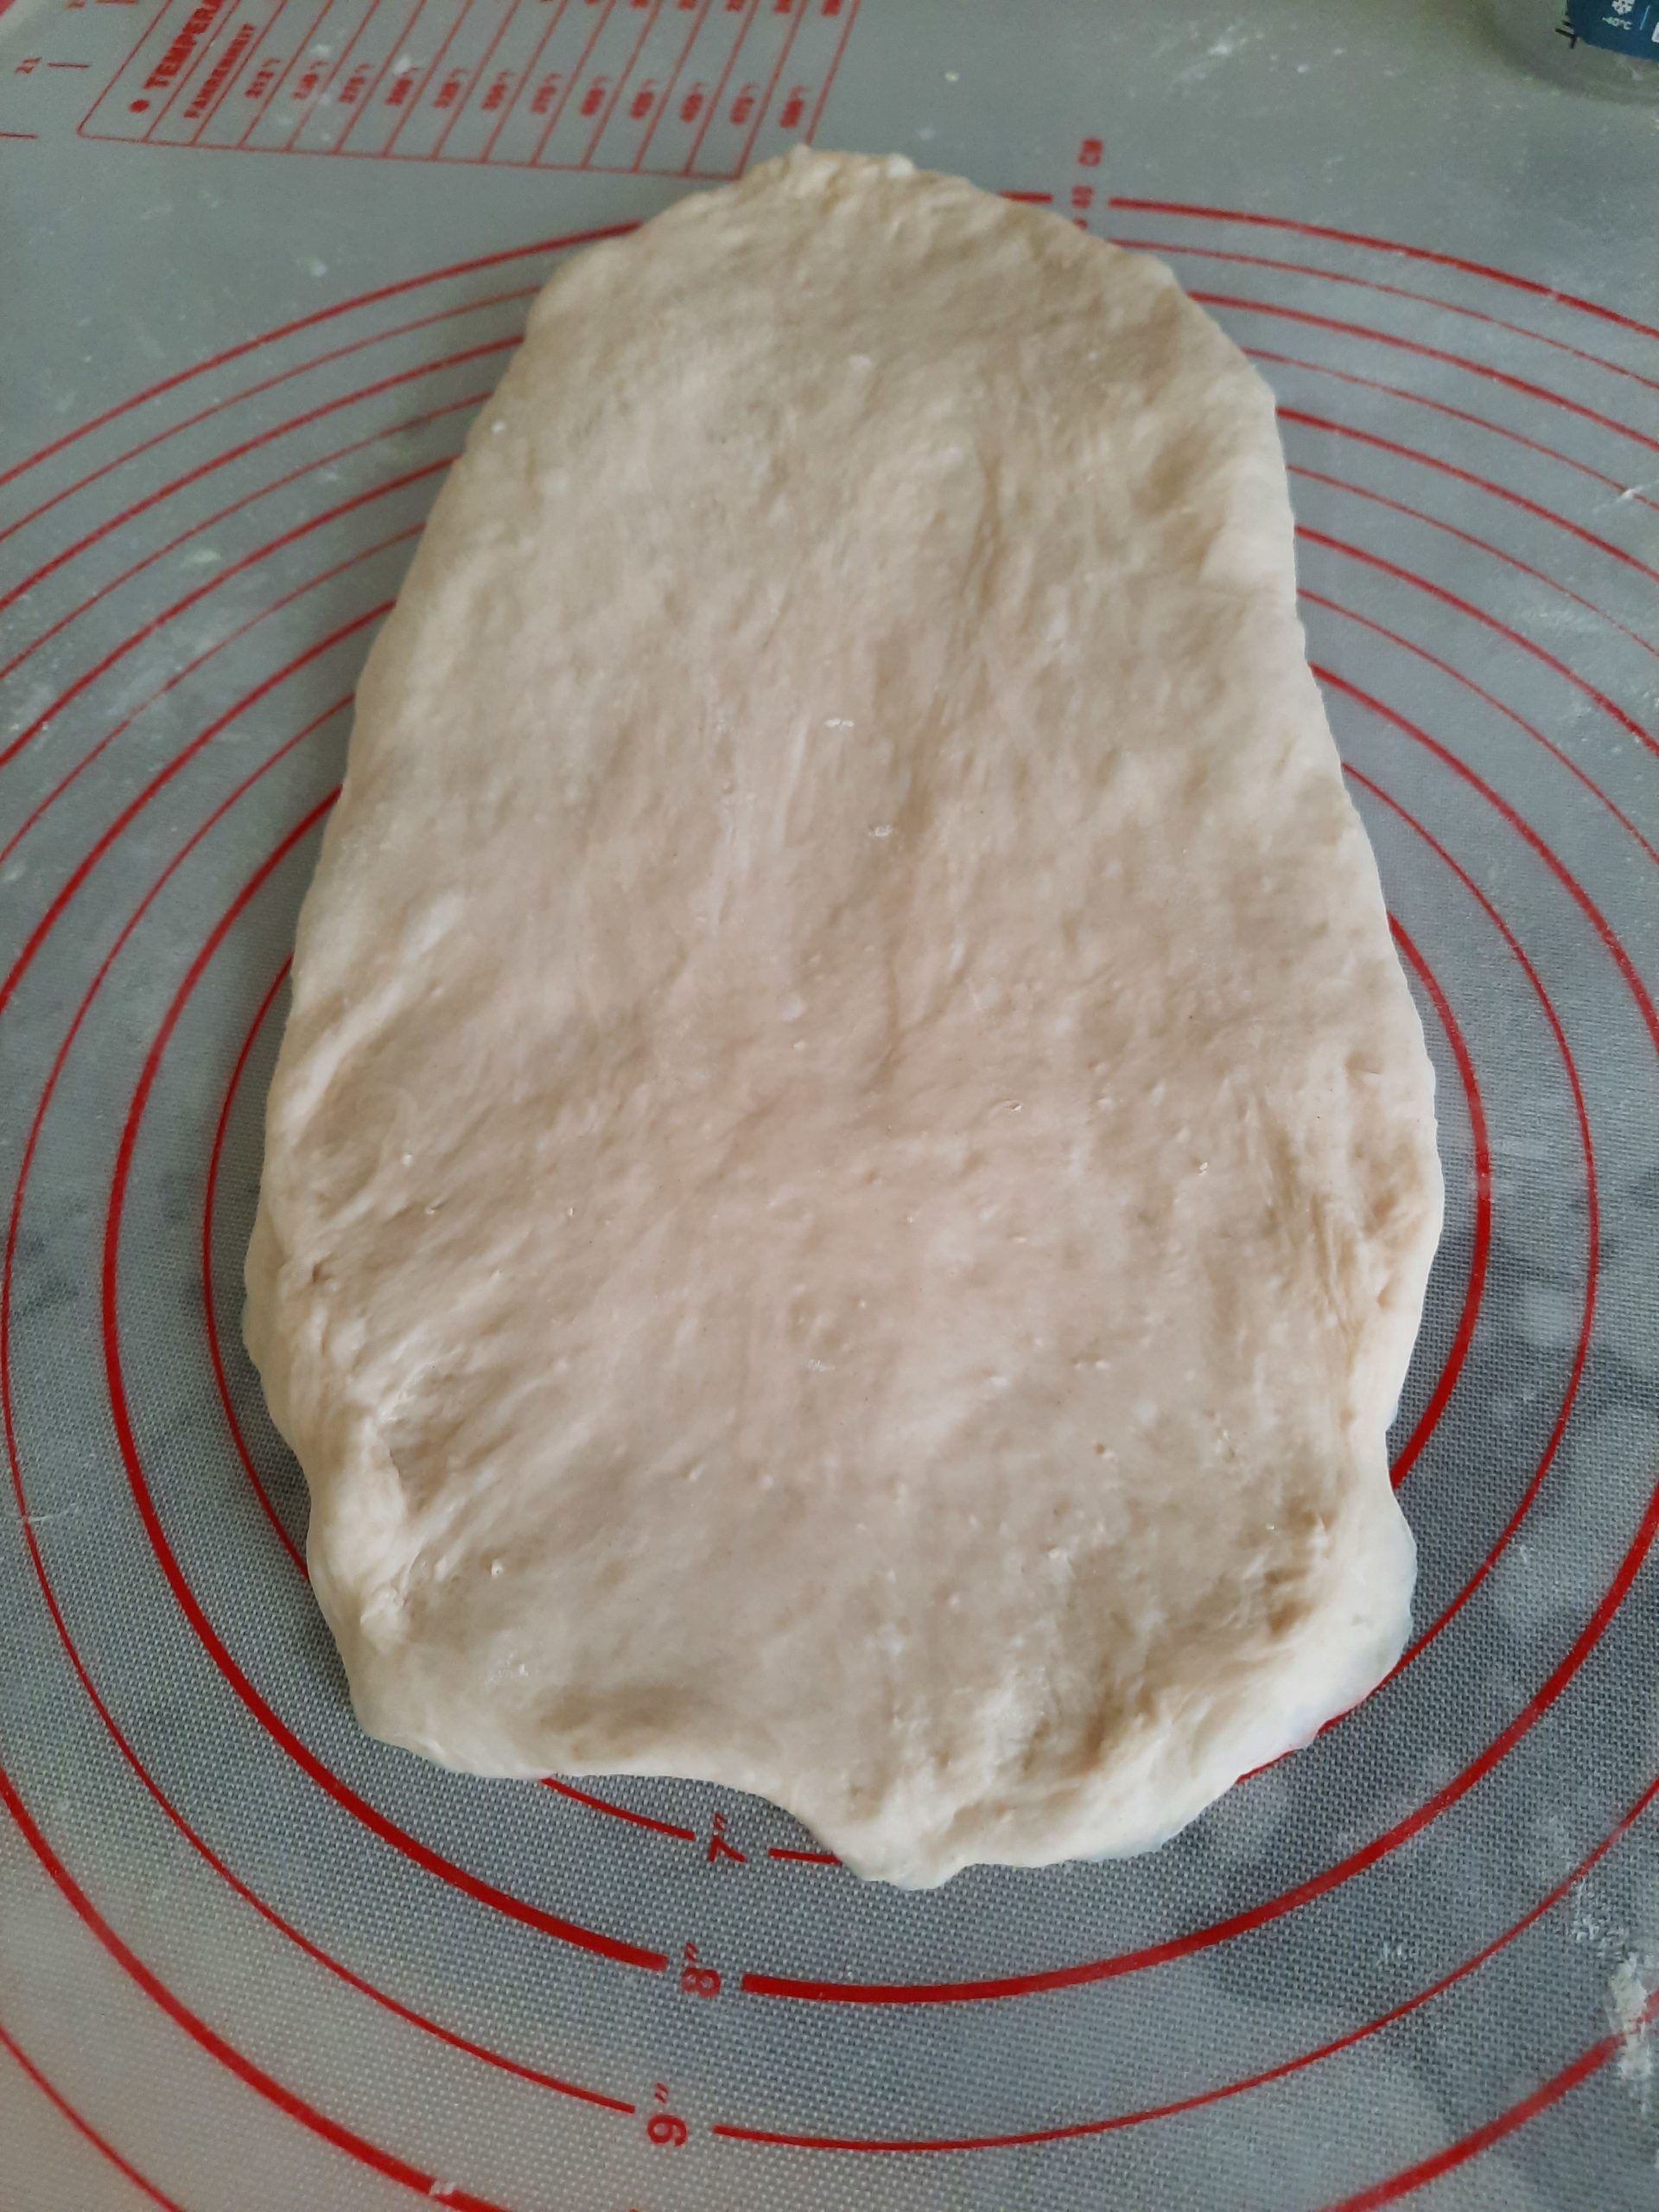 After dusting with hand flour, roll the dough into  the shape and Slightly push the dough into a slender shape